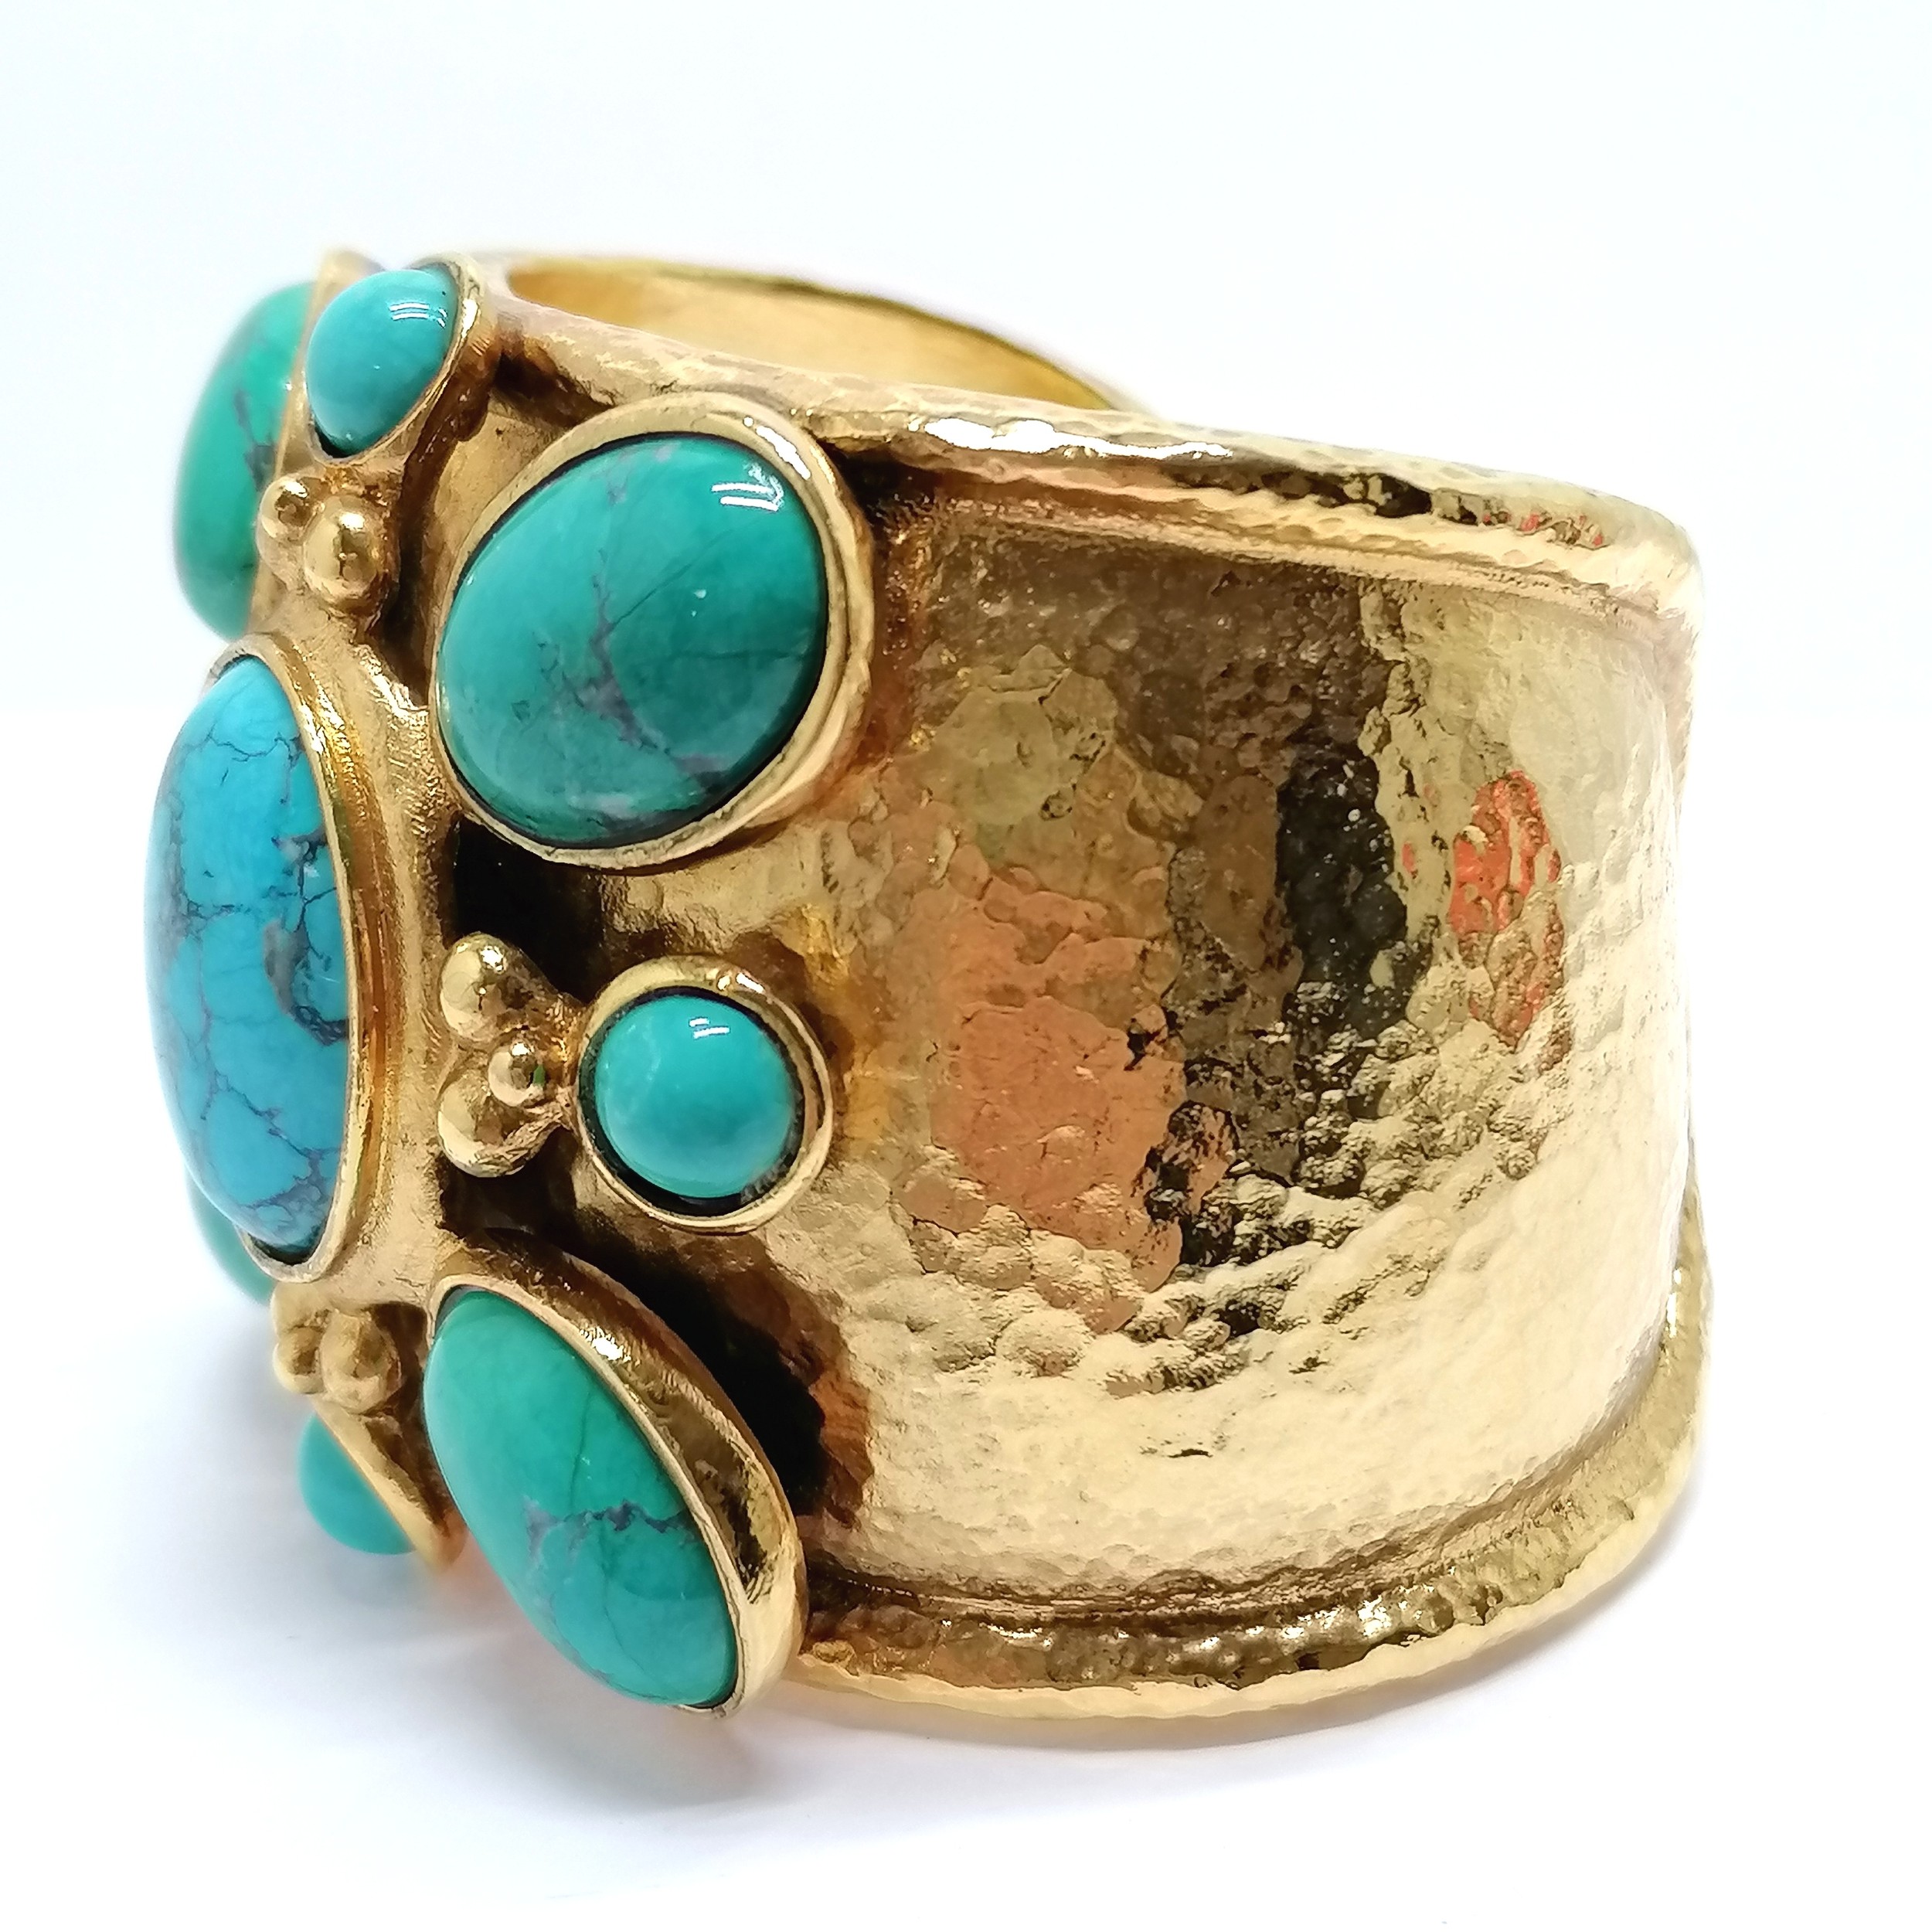 Barrera wide cuff bangle with turquoise detail - 5cm across & 139g in weight - Image 2 of 3